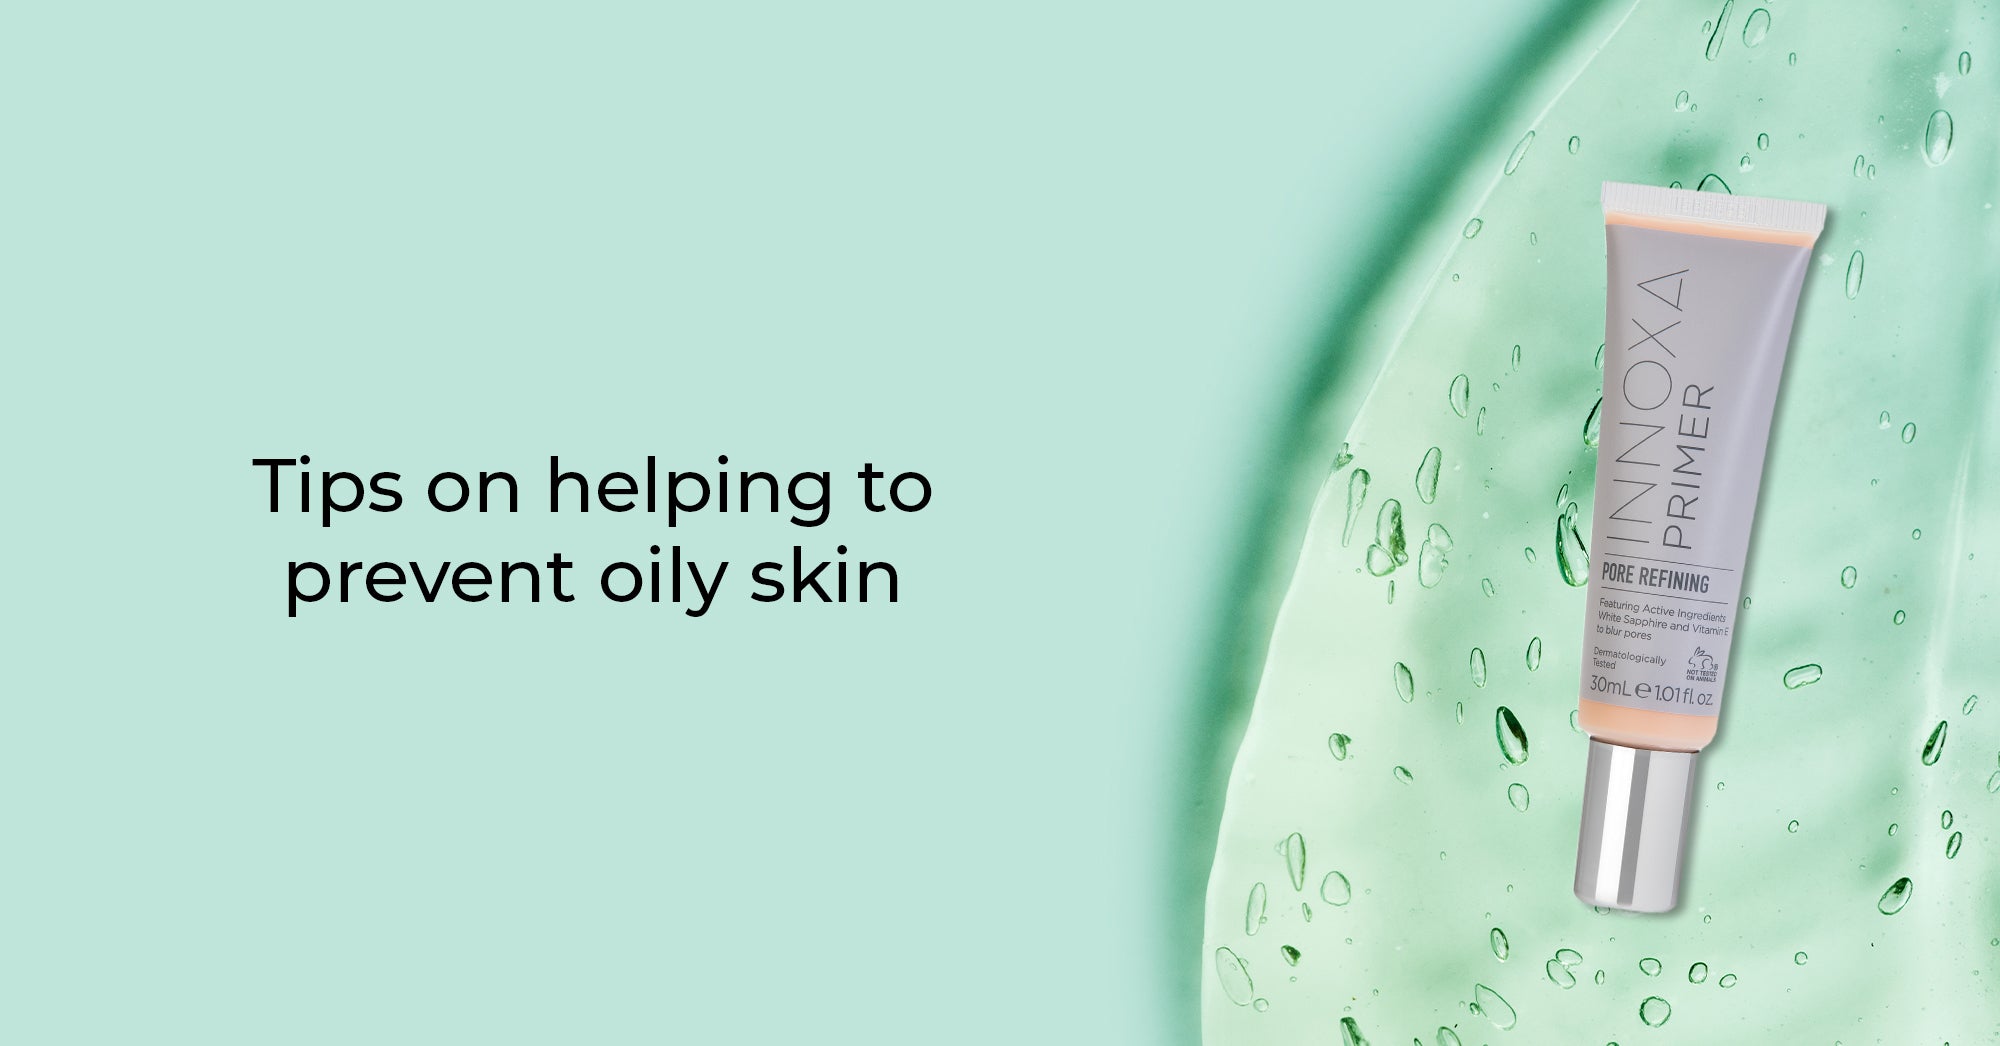 The skincare routine for oily skin